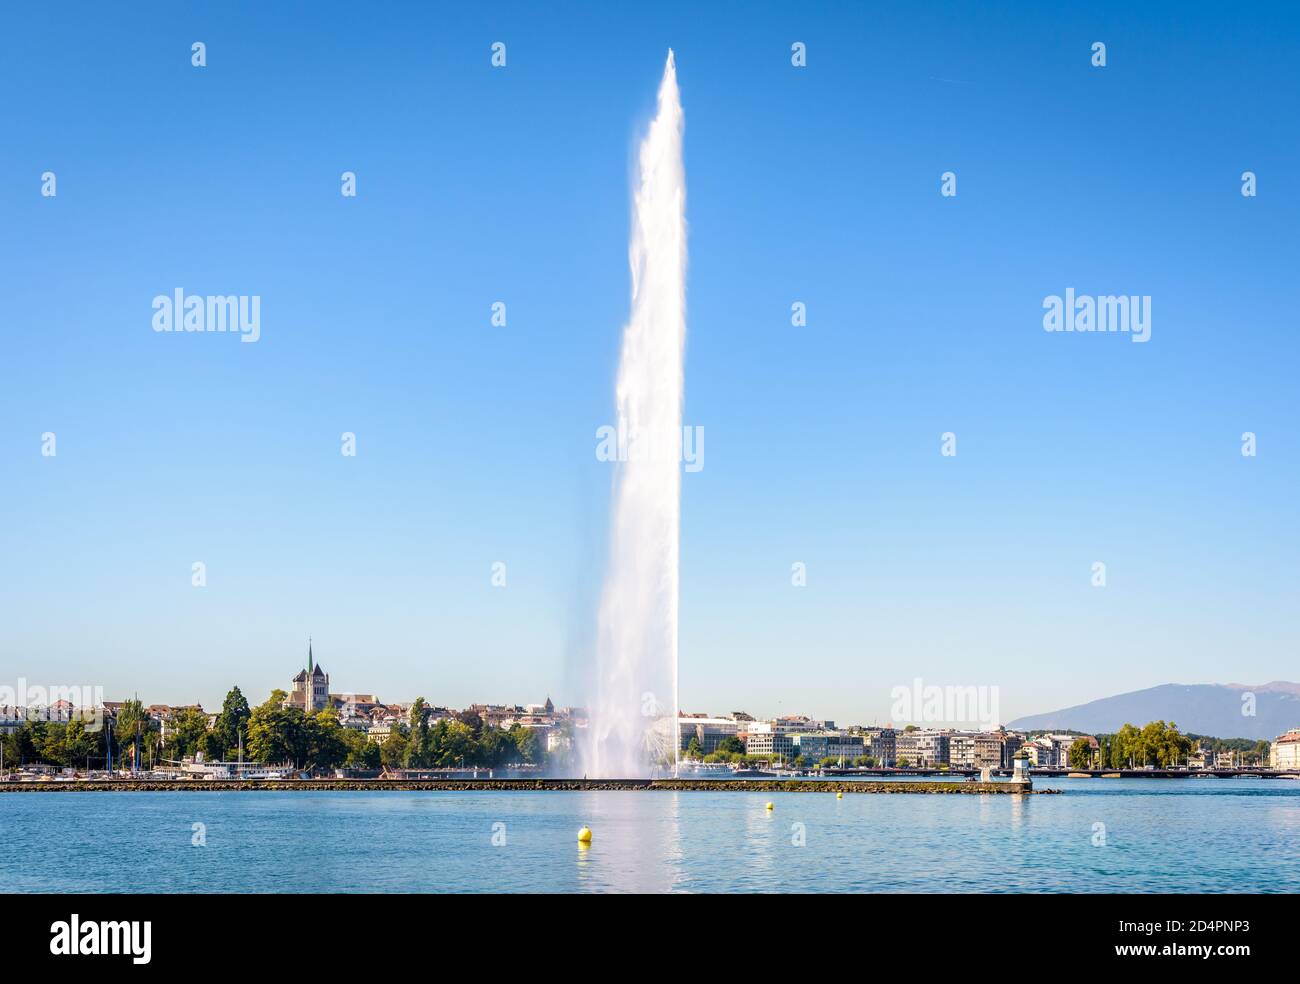 The cathedral is overlooking the city and bay of Geneva, Switzerland, with  the Jet d'Eau, the emblematic 140 meter-high water jet fountain on the Lake  Stock Photo - Alamy